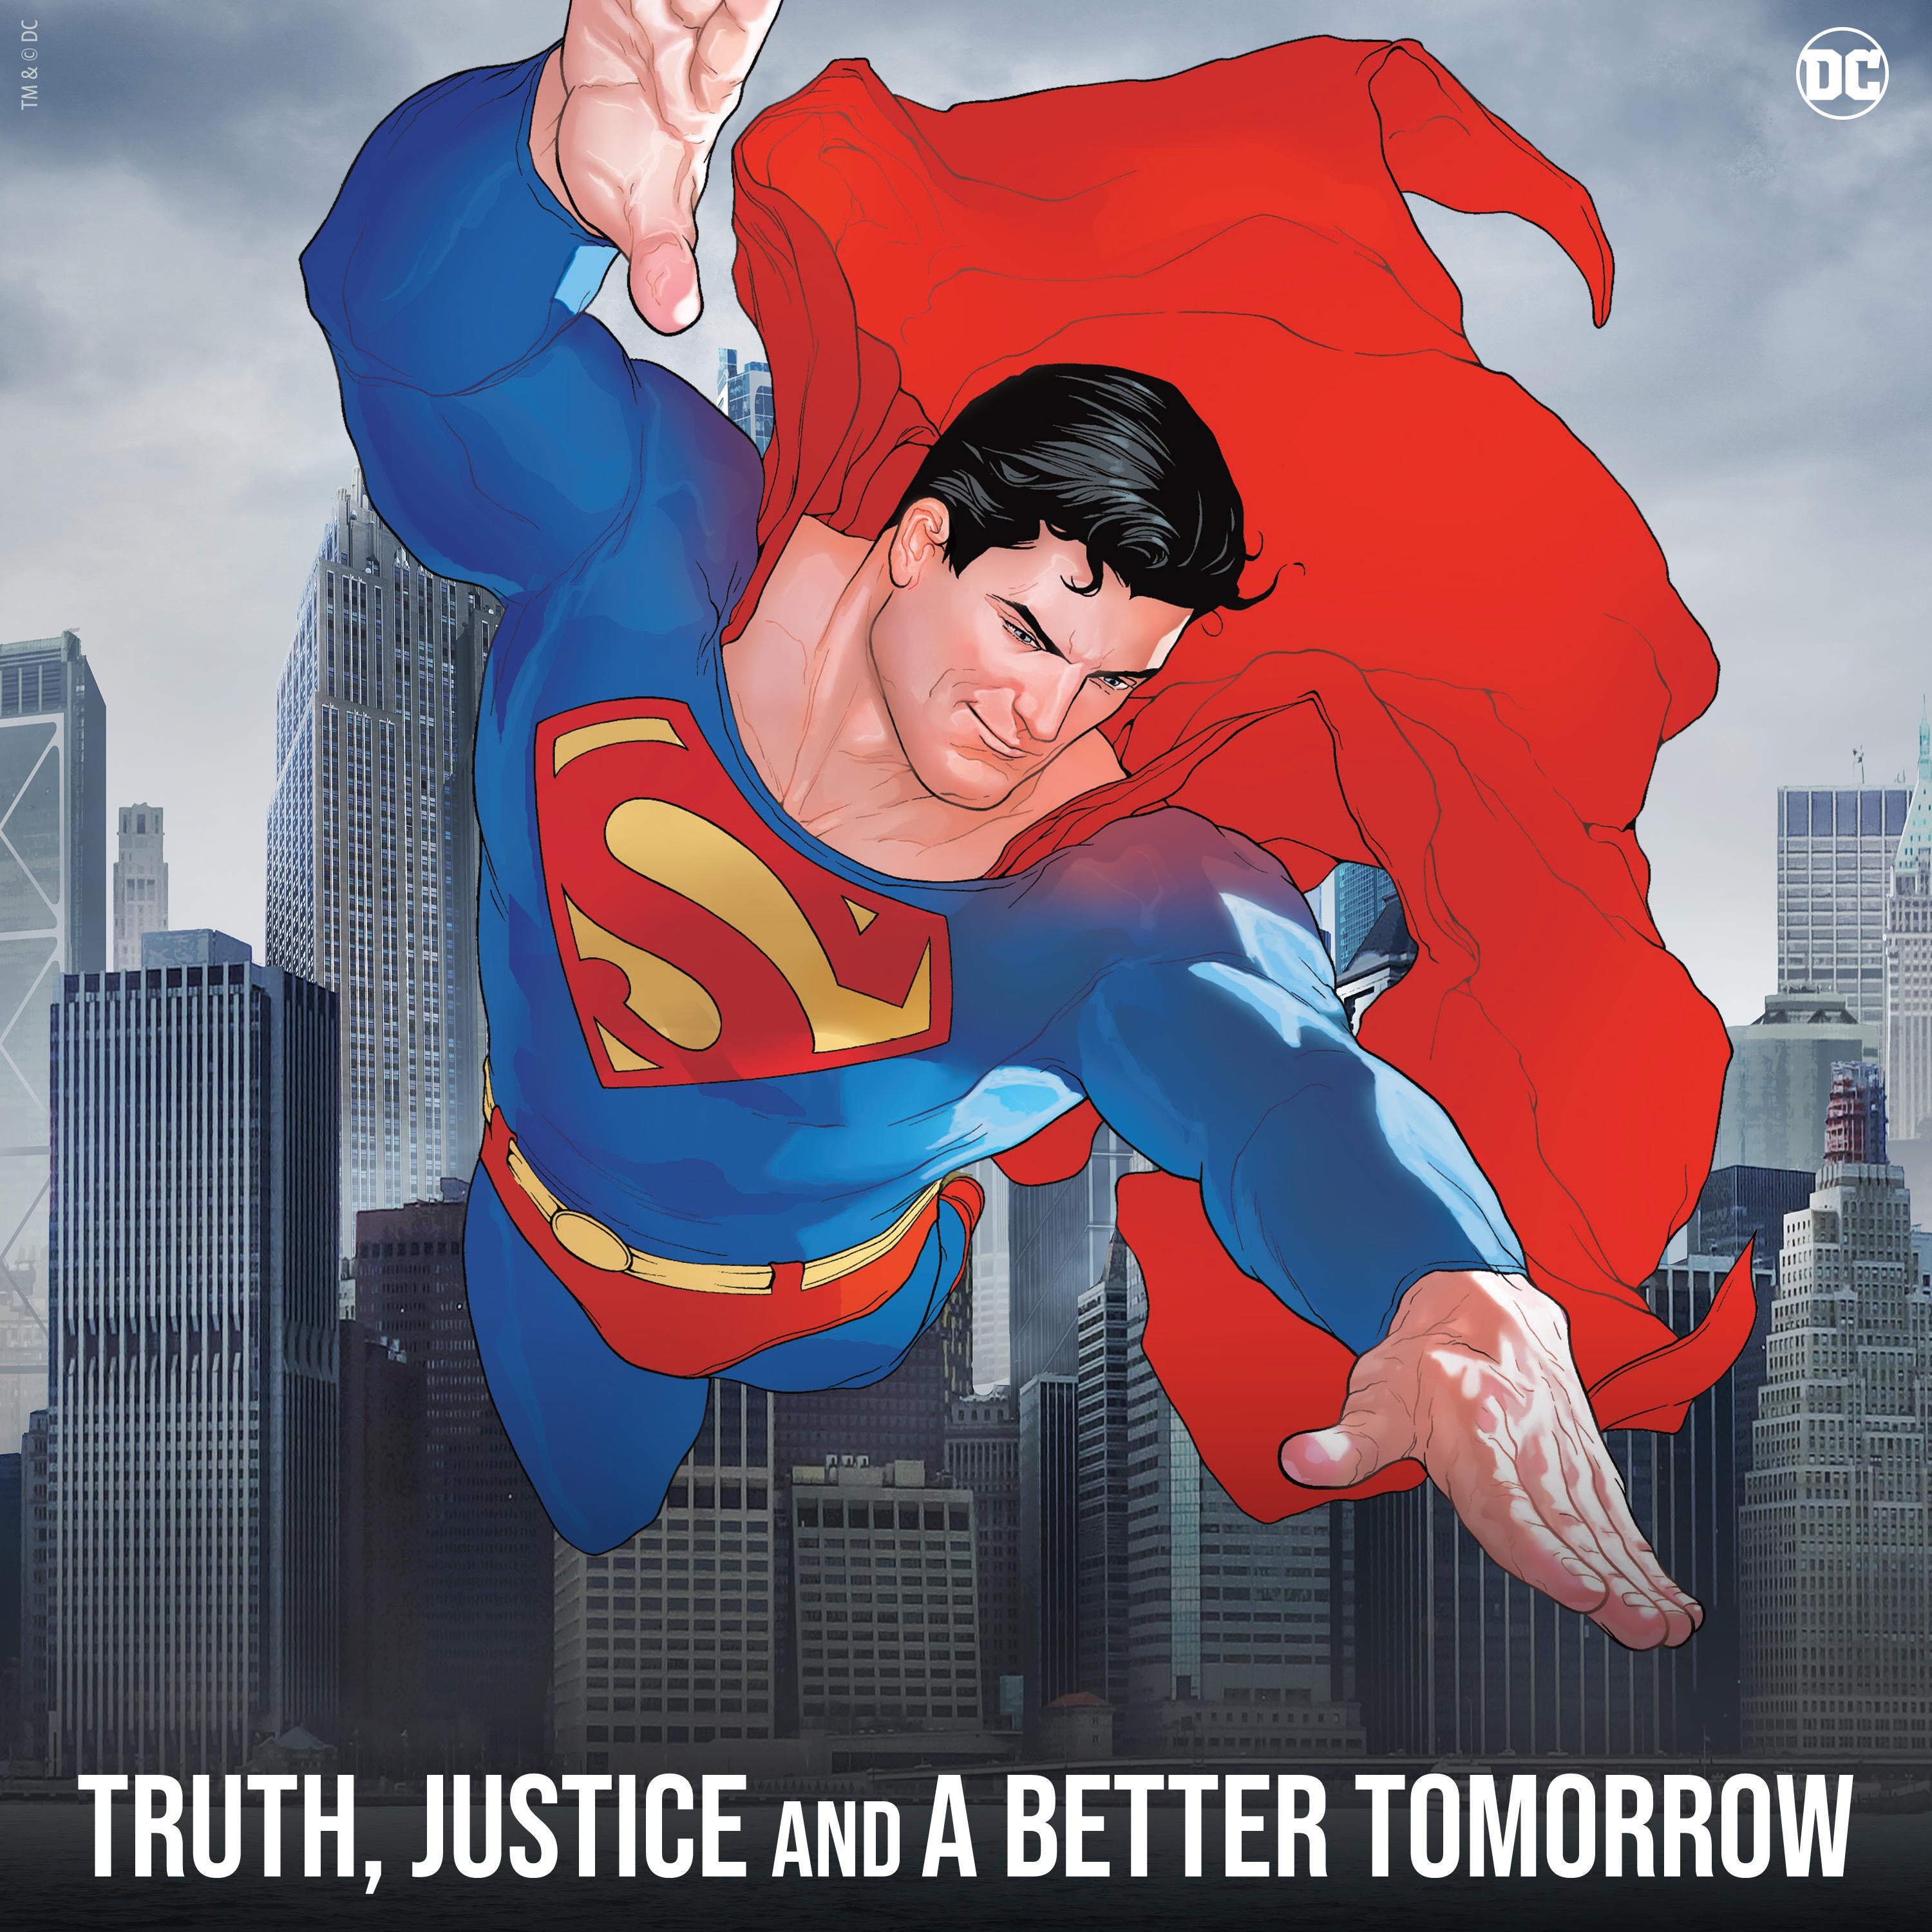 dc-superman-truth-justice-and-a-better-tomorrow.jpg